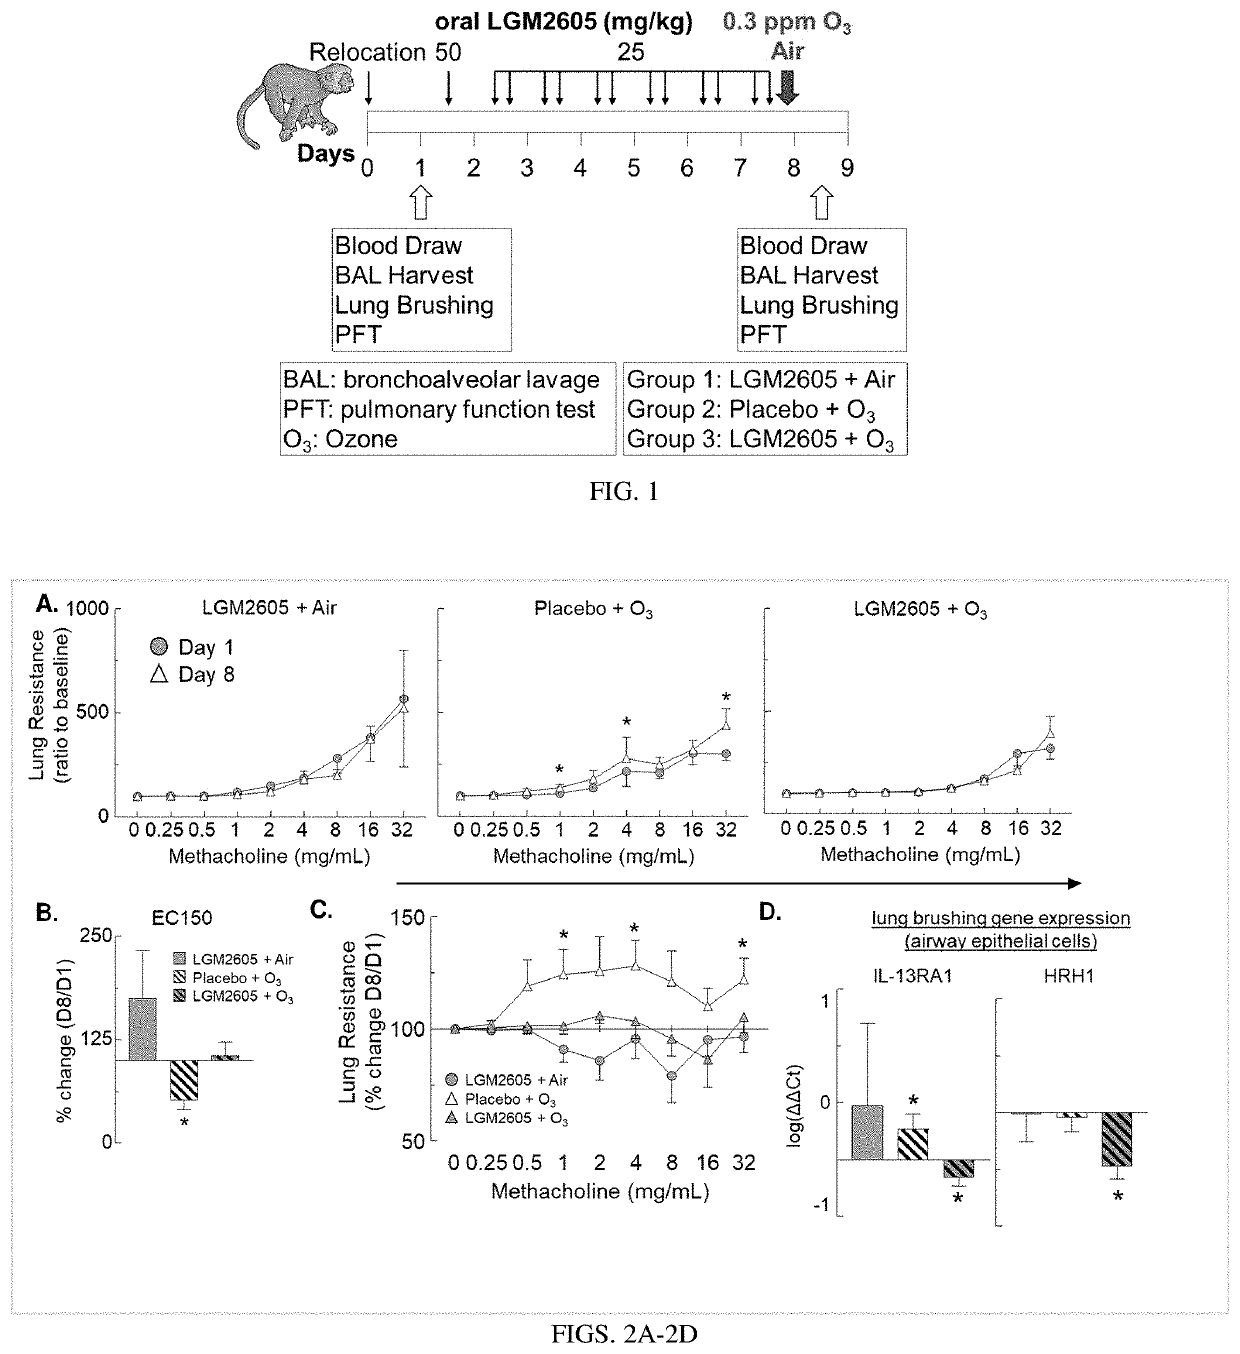 Effects of LGM2605 on a primate model of asthma